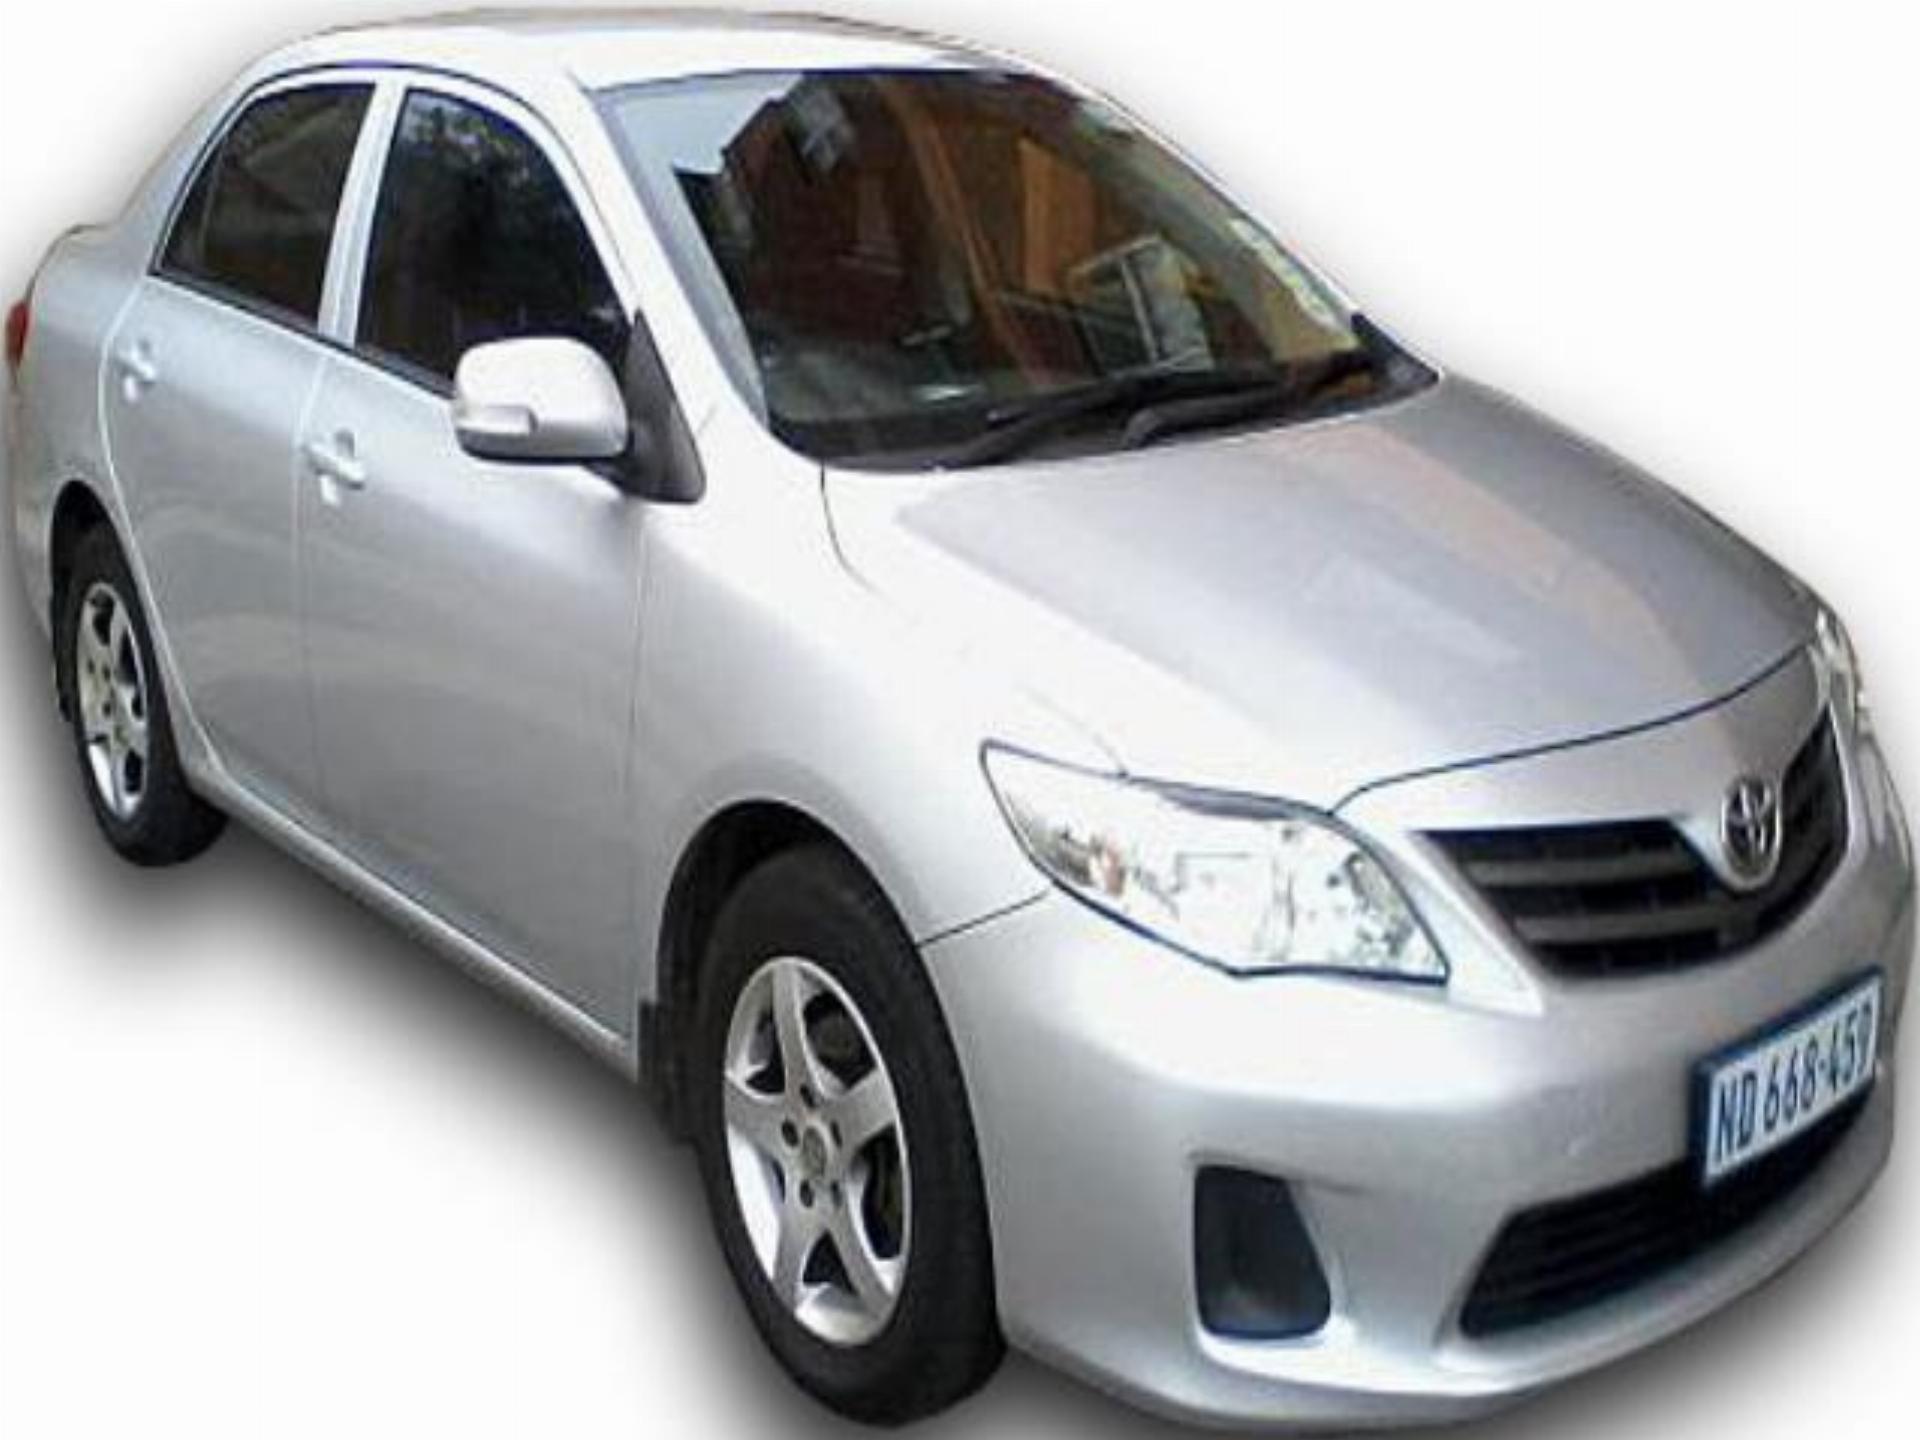 Used Toyota Corolla 1.6 Professional 2010 on auction